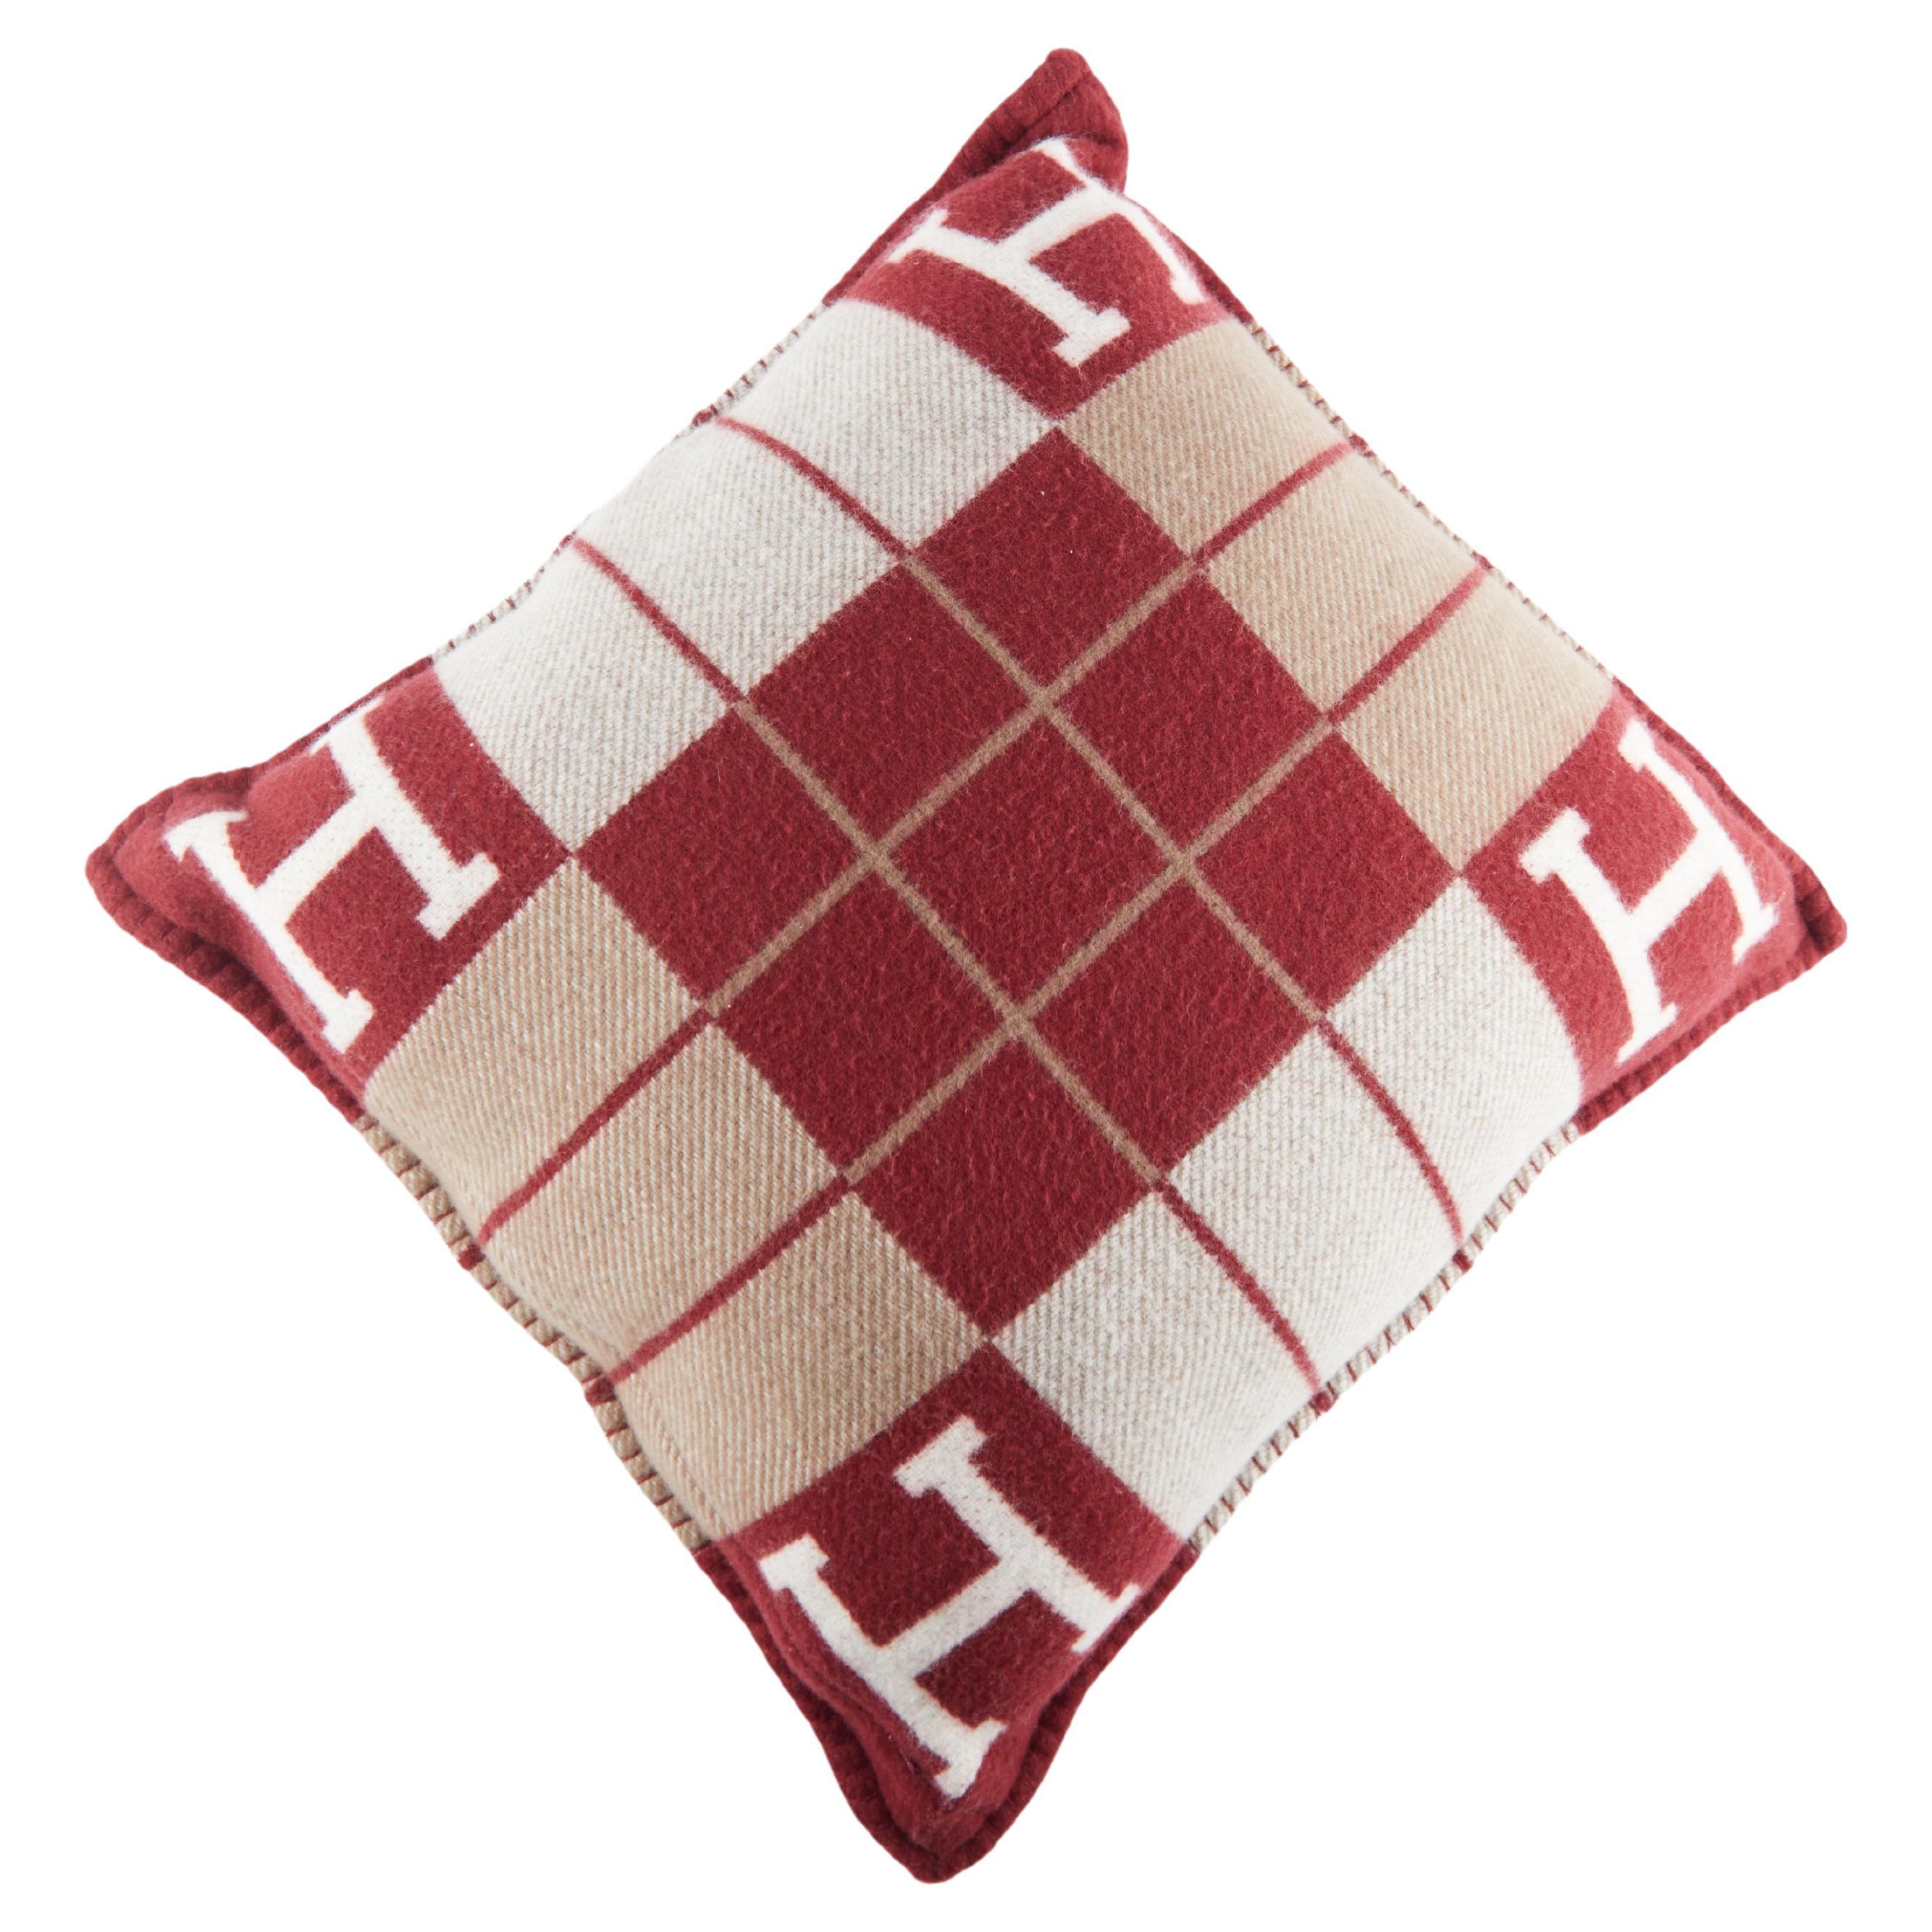 HERMÈS AVALON III PILLOW Small Model in Rouge H Regular price